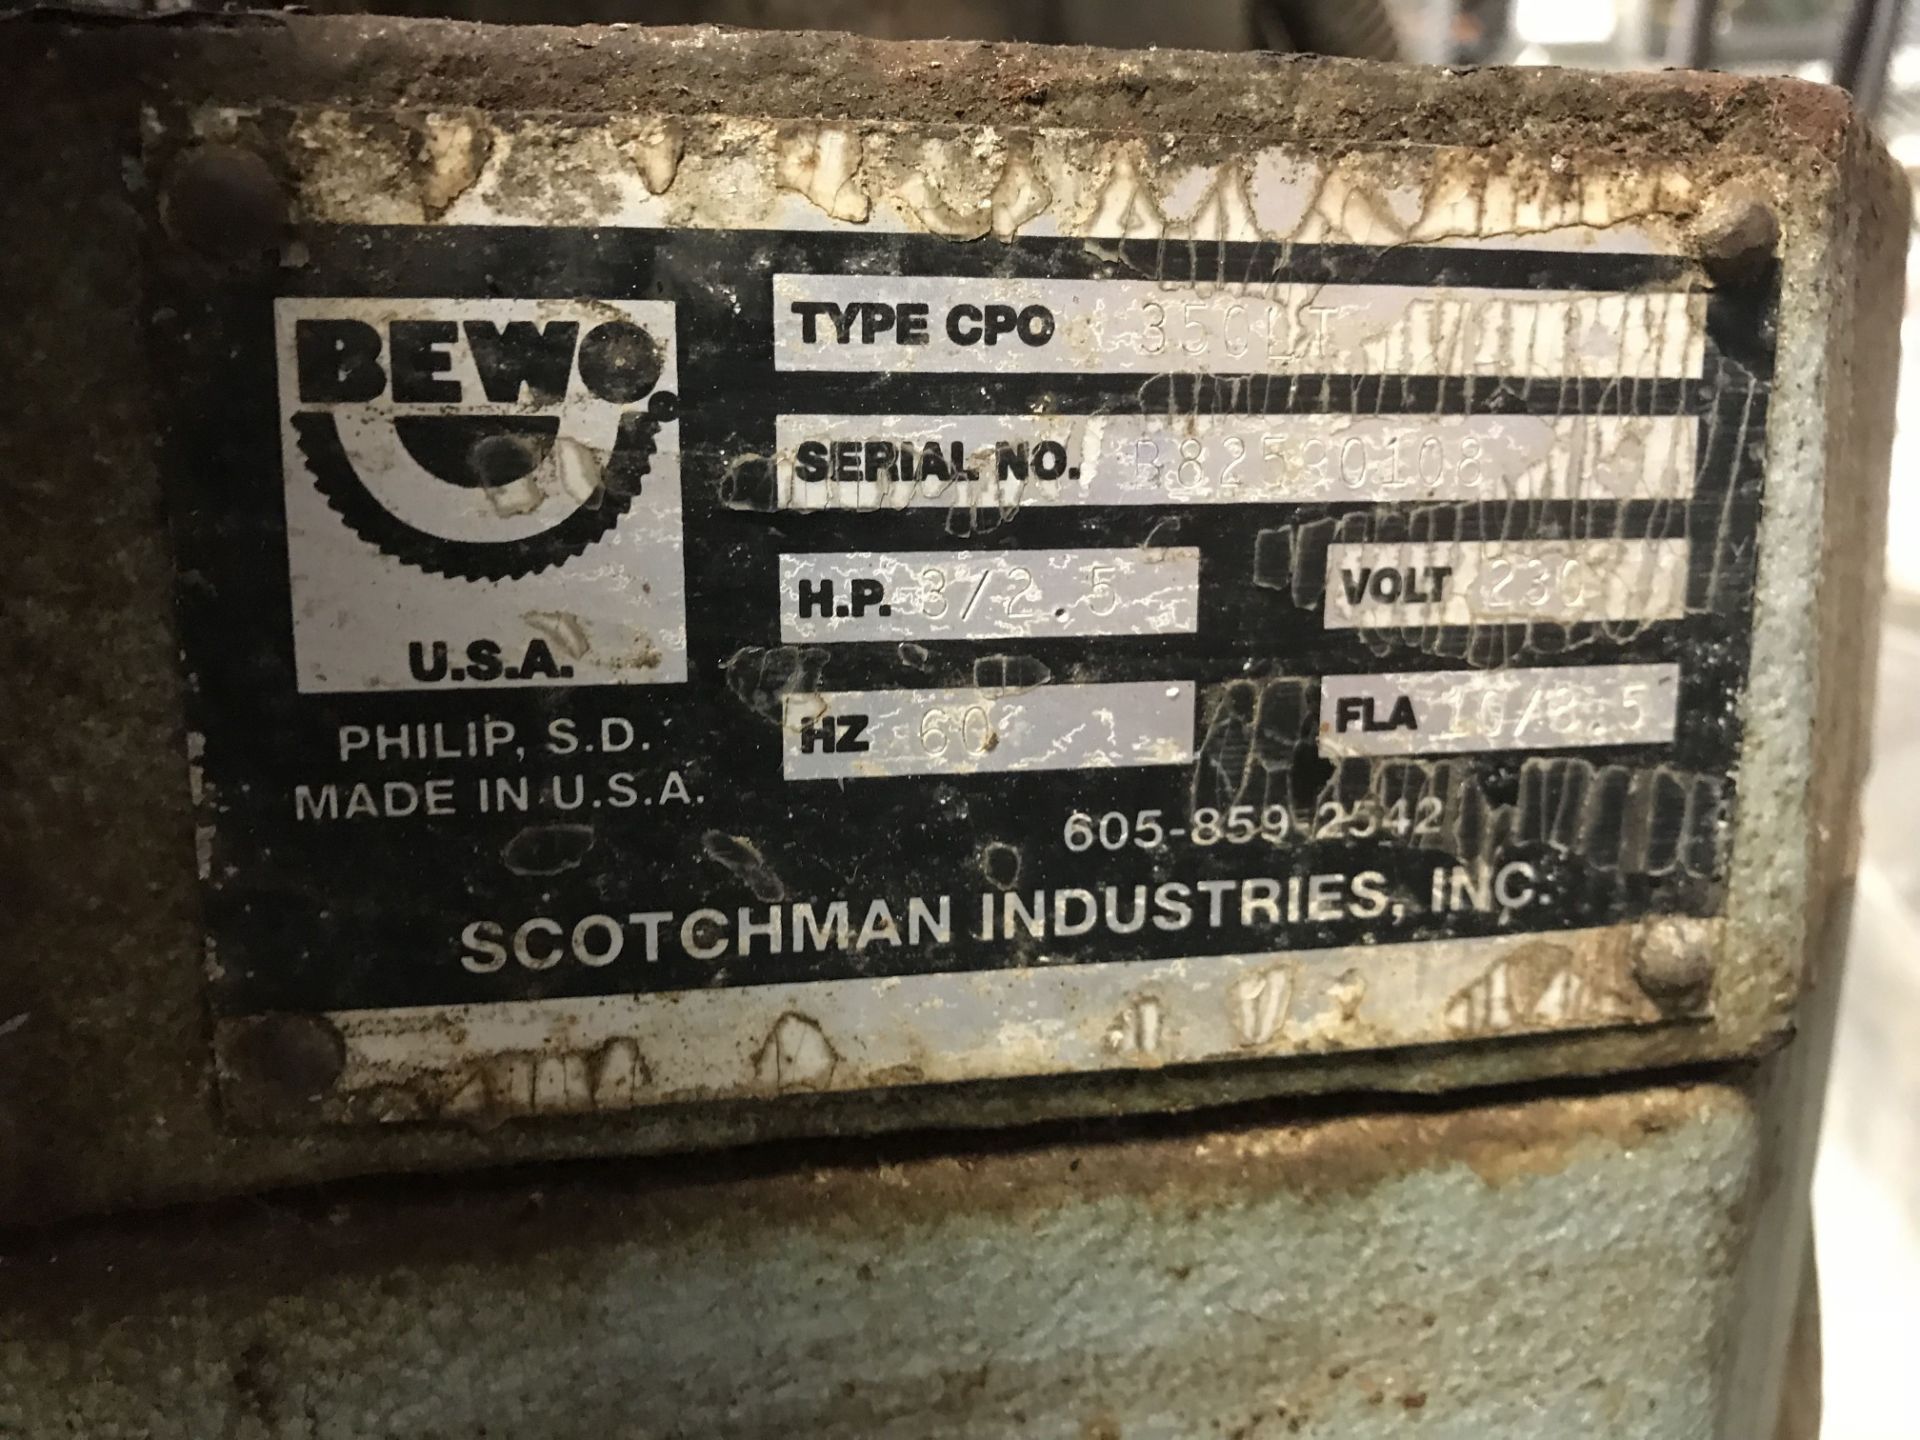 14" SCOTCHMAN MODEL CPO-350 MITRE HEAD COLD SAW; S/N B82590108, 3-1/4 HP, 230 VOLT **LOCATED AT - Image 4 of 8